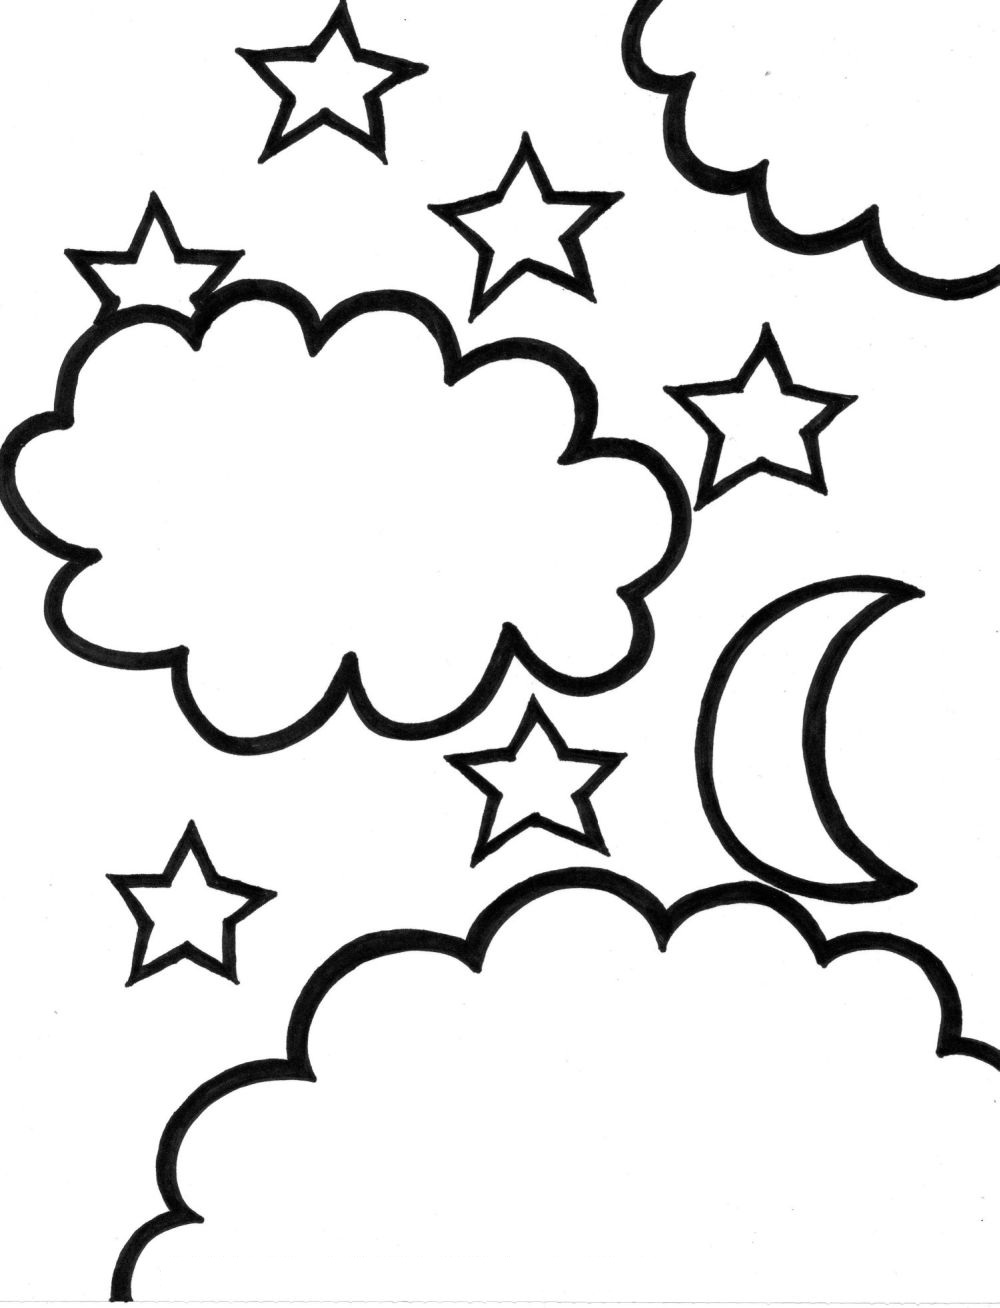  Stars Coloring Pages Star with Moon | Print Coloring Pages